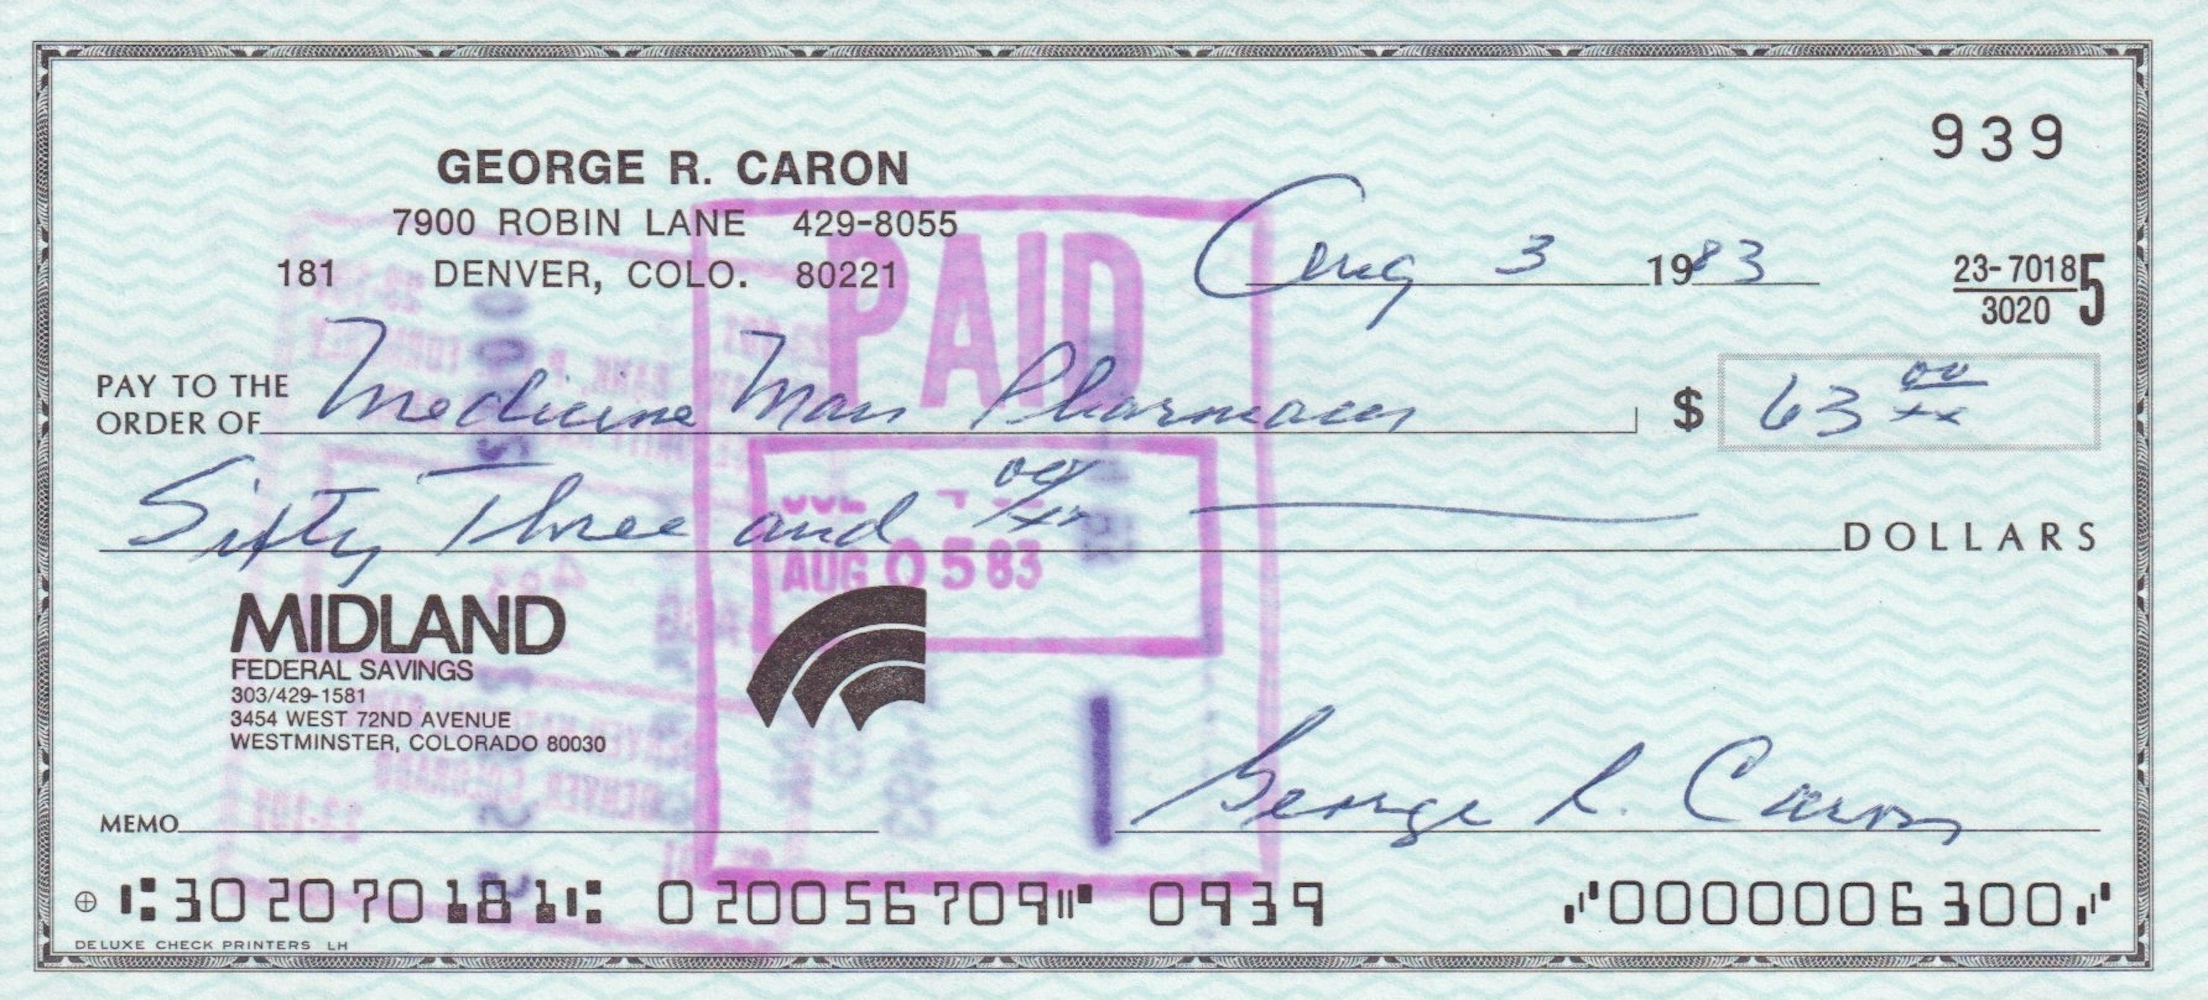 George R. Caron Enola Gay Tail Gunner Signed Bank Cheque. Good condition. All autographs come with a